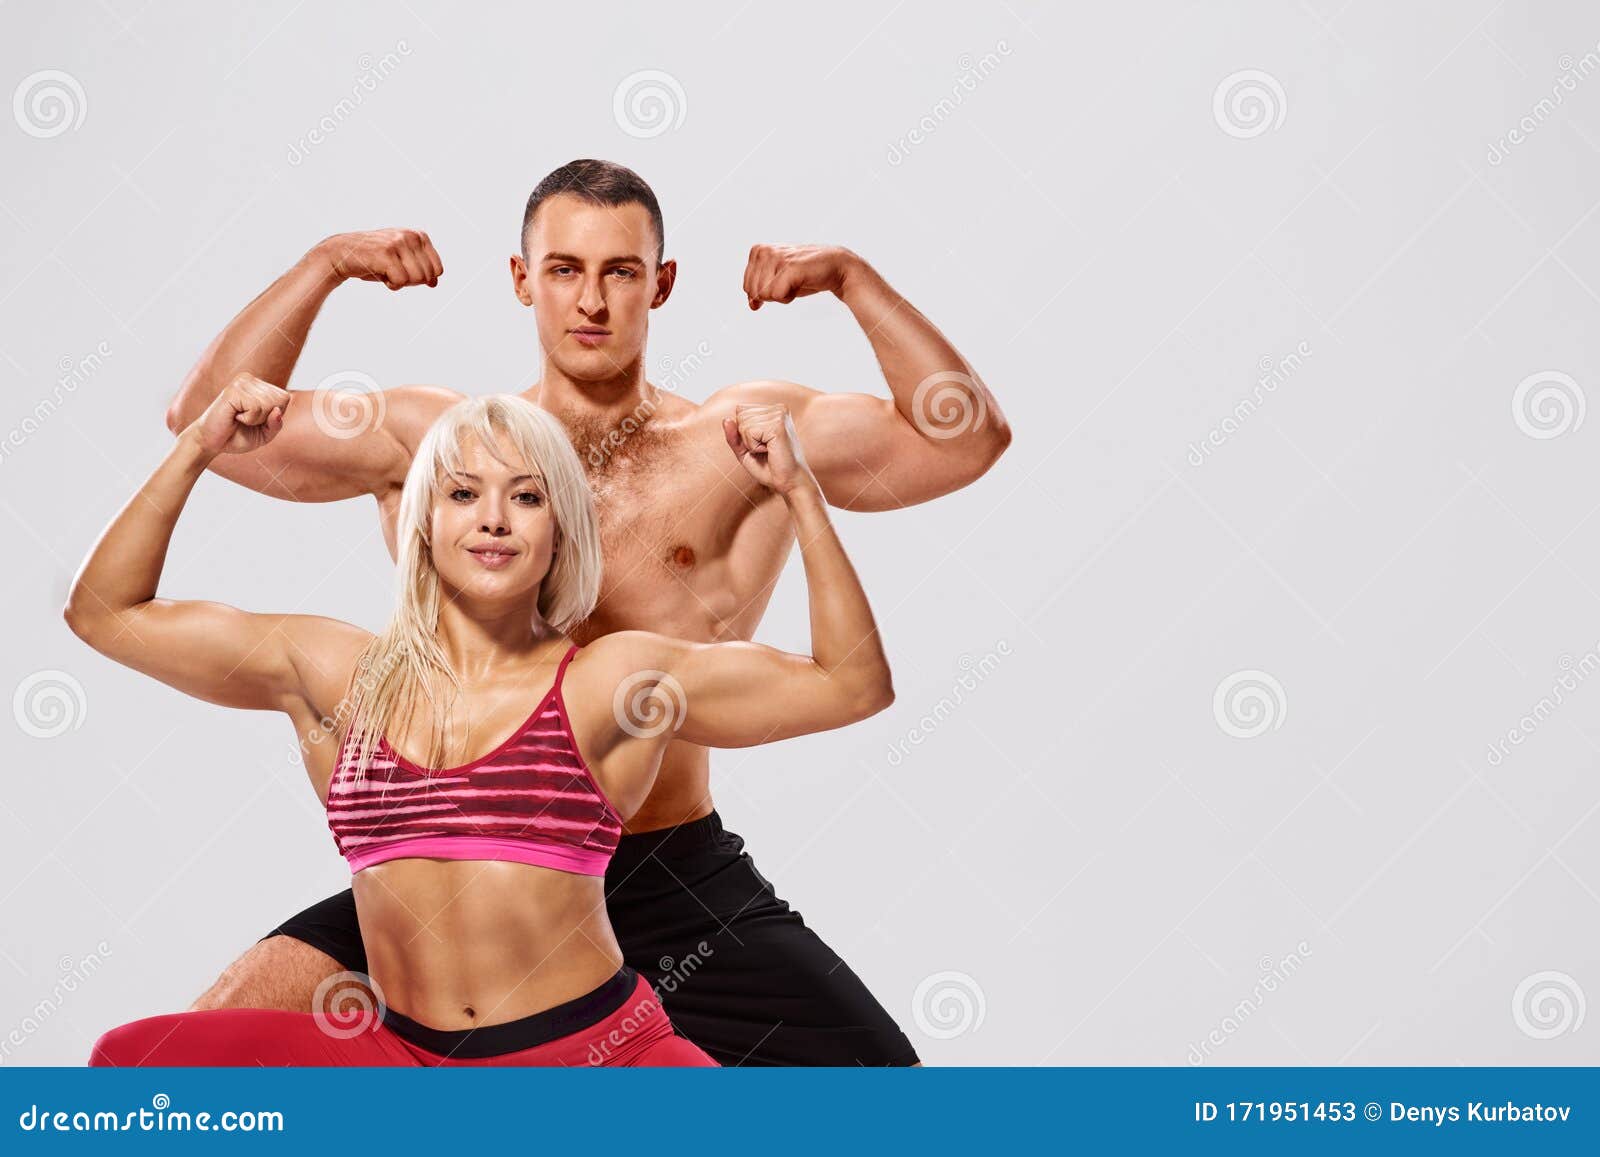 Strong Couple